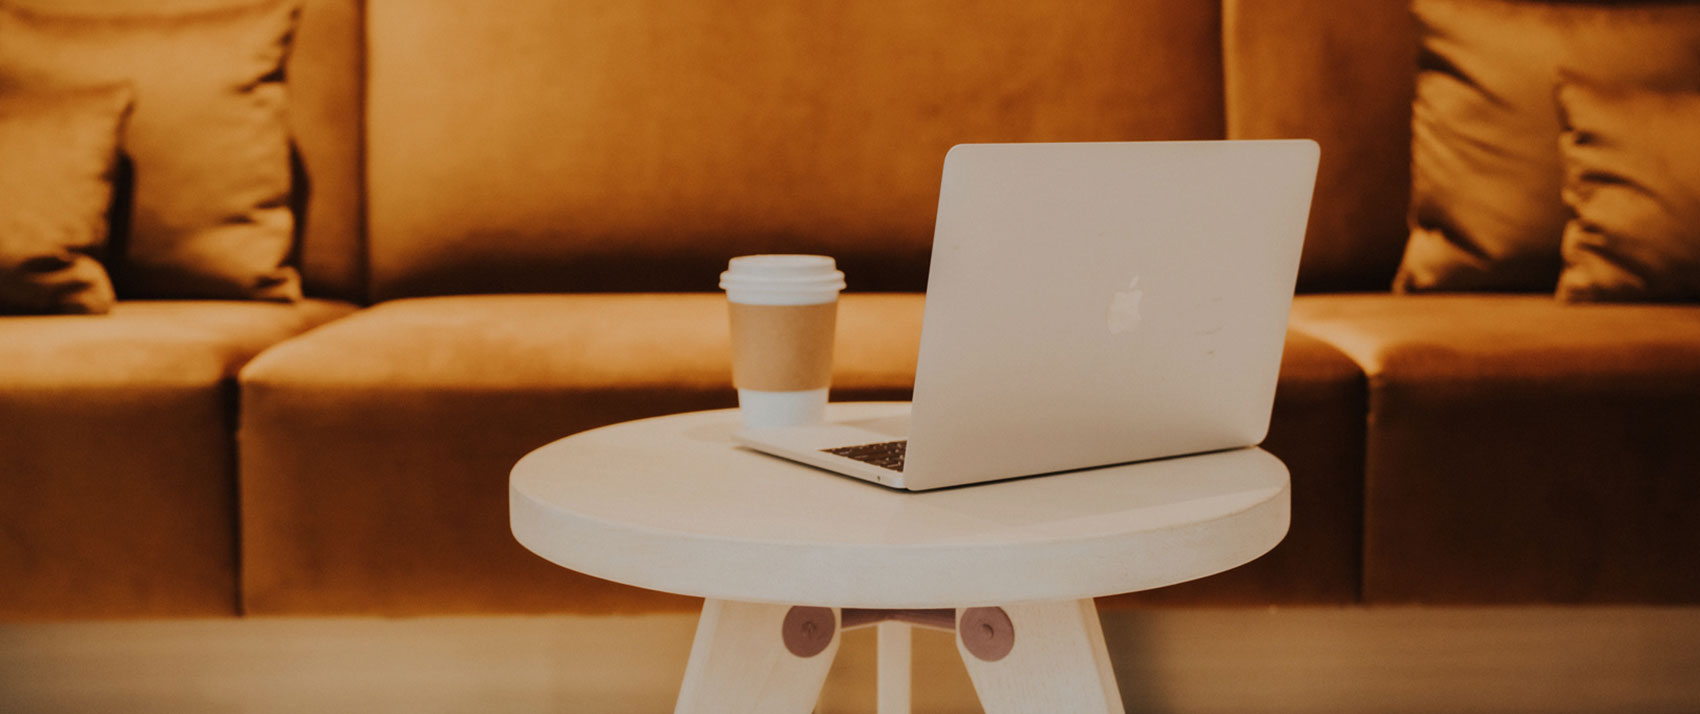 computer and coffee cup on table in front of a couch